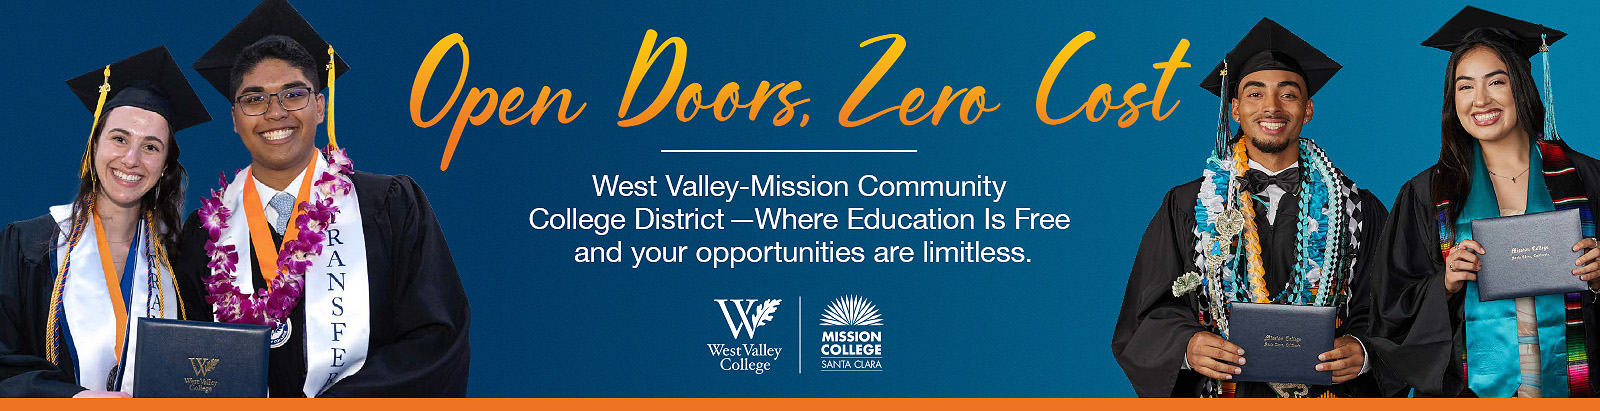 Open doors, open eduction. West ʮϲ Mission Community College District – where education is free and the opportunities are limitless